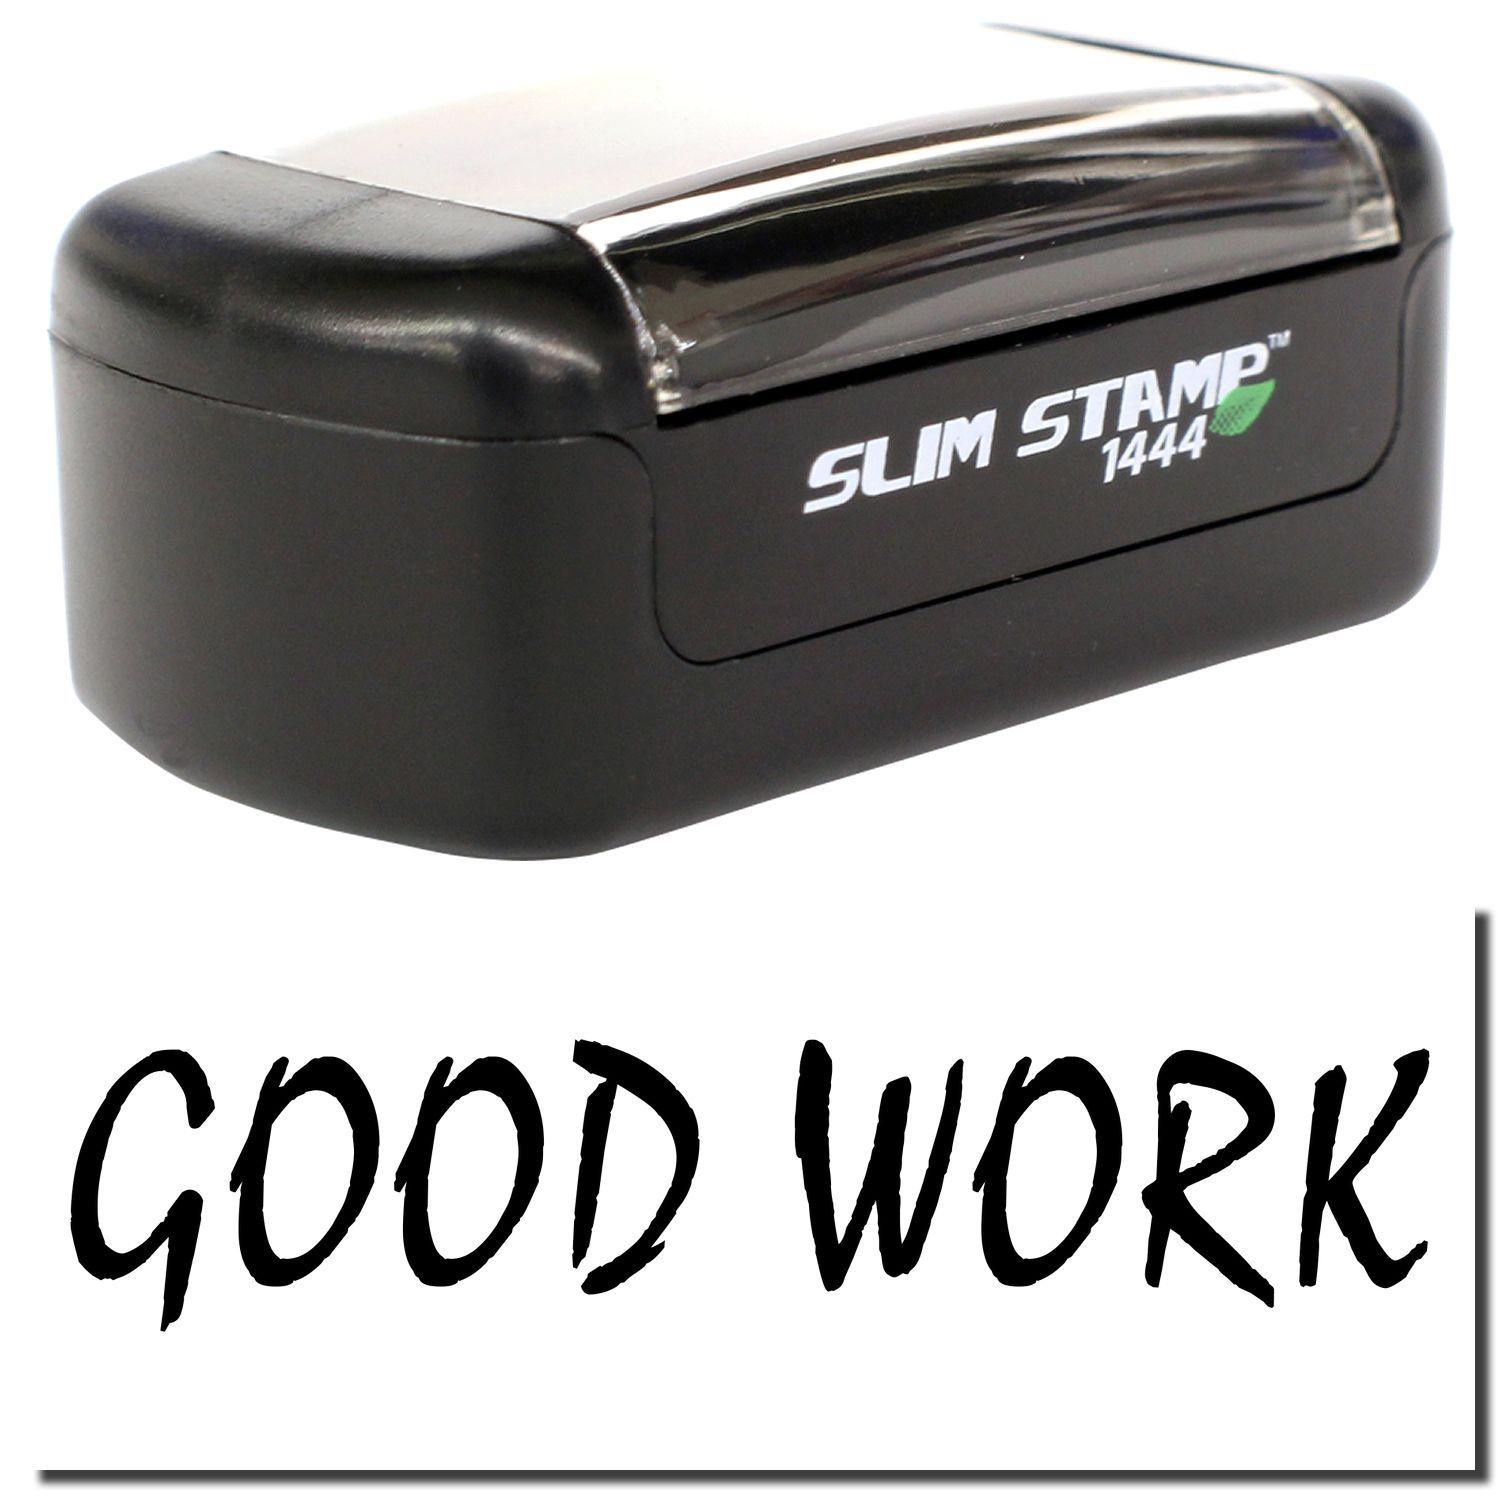 A stock office pre-inked stamp with a stamped image showing how the text "GOOD WORK" is displayed after stamping.